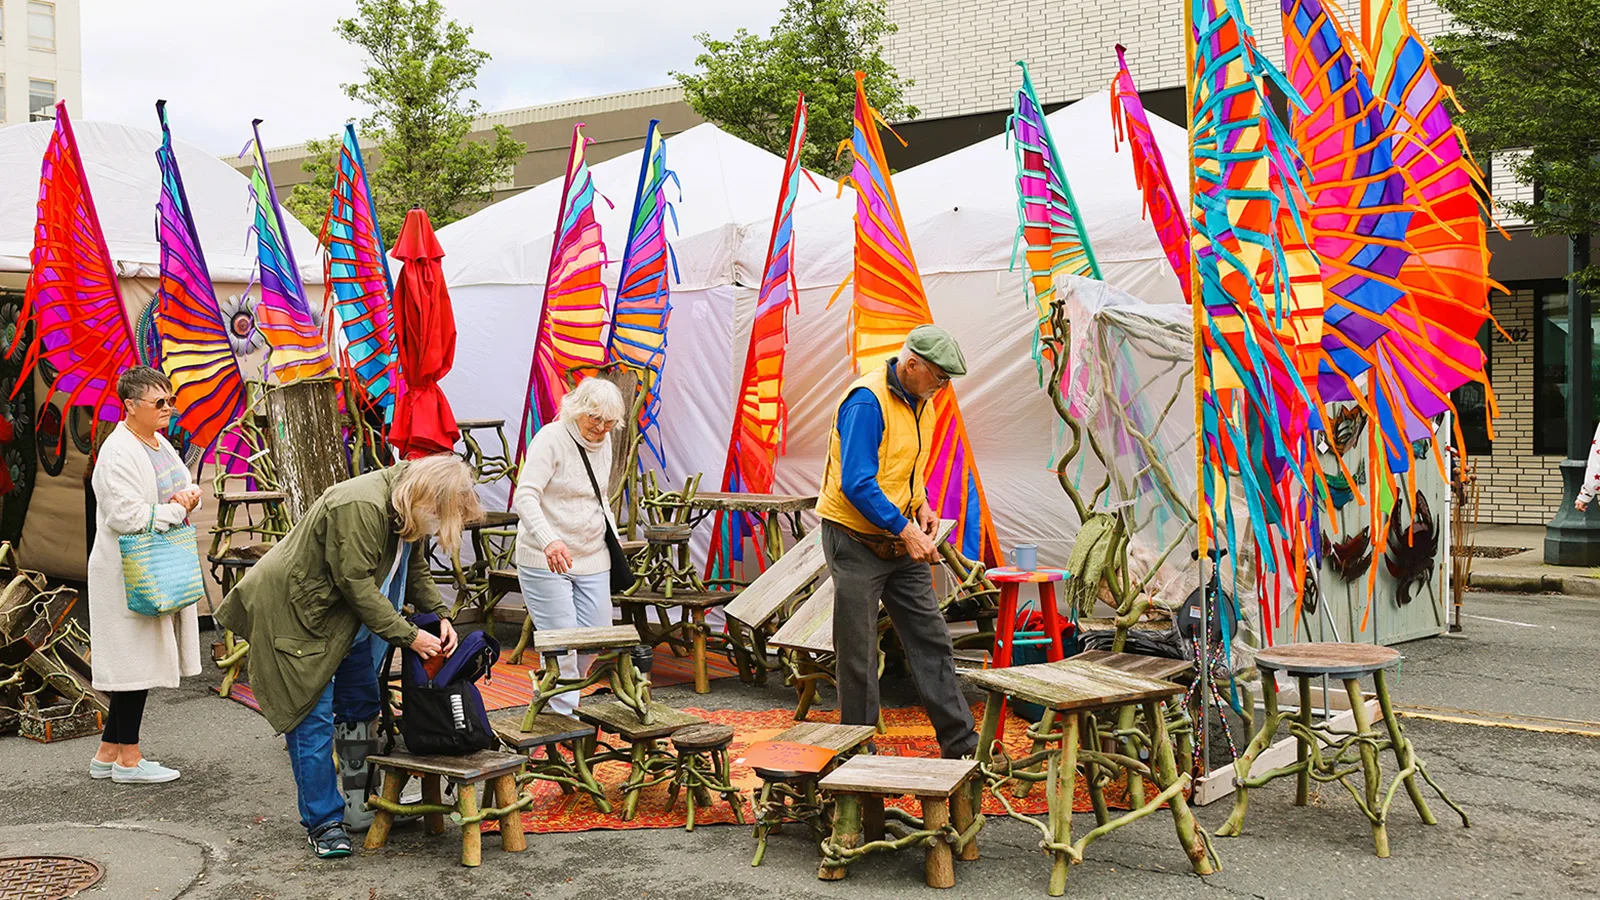 A group of people inspect outdoor furniture at Sorticulture. Tall colorful pole banners stand in the background